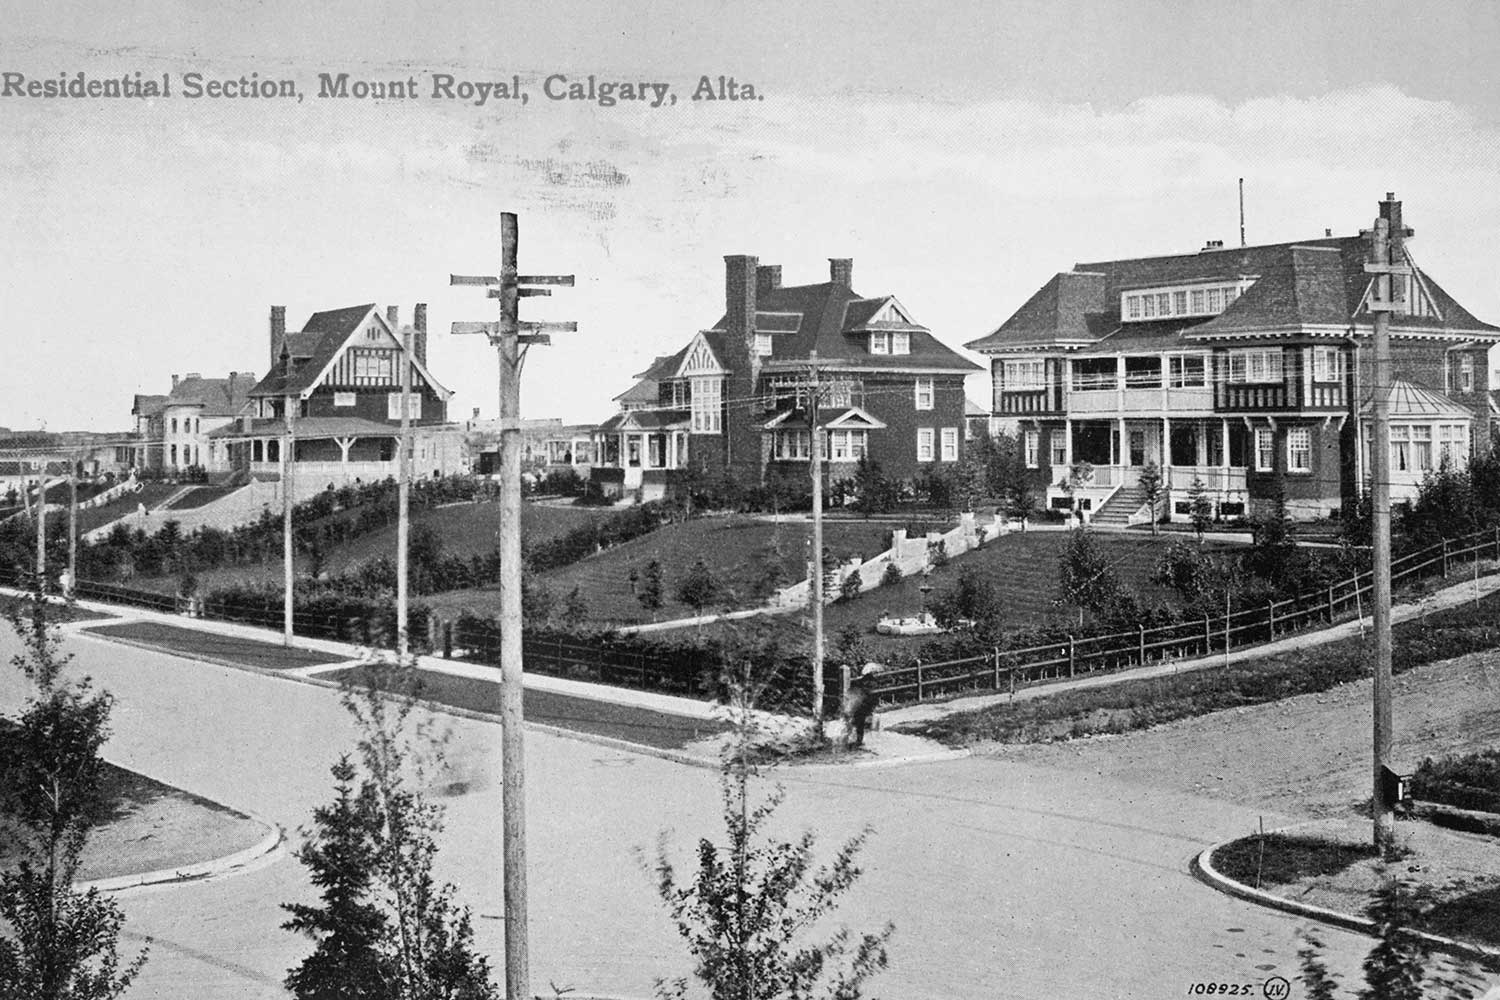 The Sayre Estate was built in 1905 at American Hill, the area that became the modern-day community of Mount Royal.
Glenbow Archives (NA-2022-2)